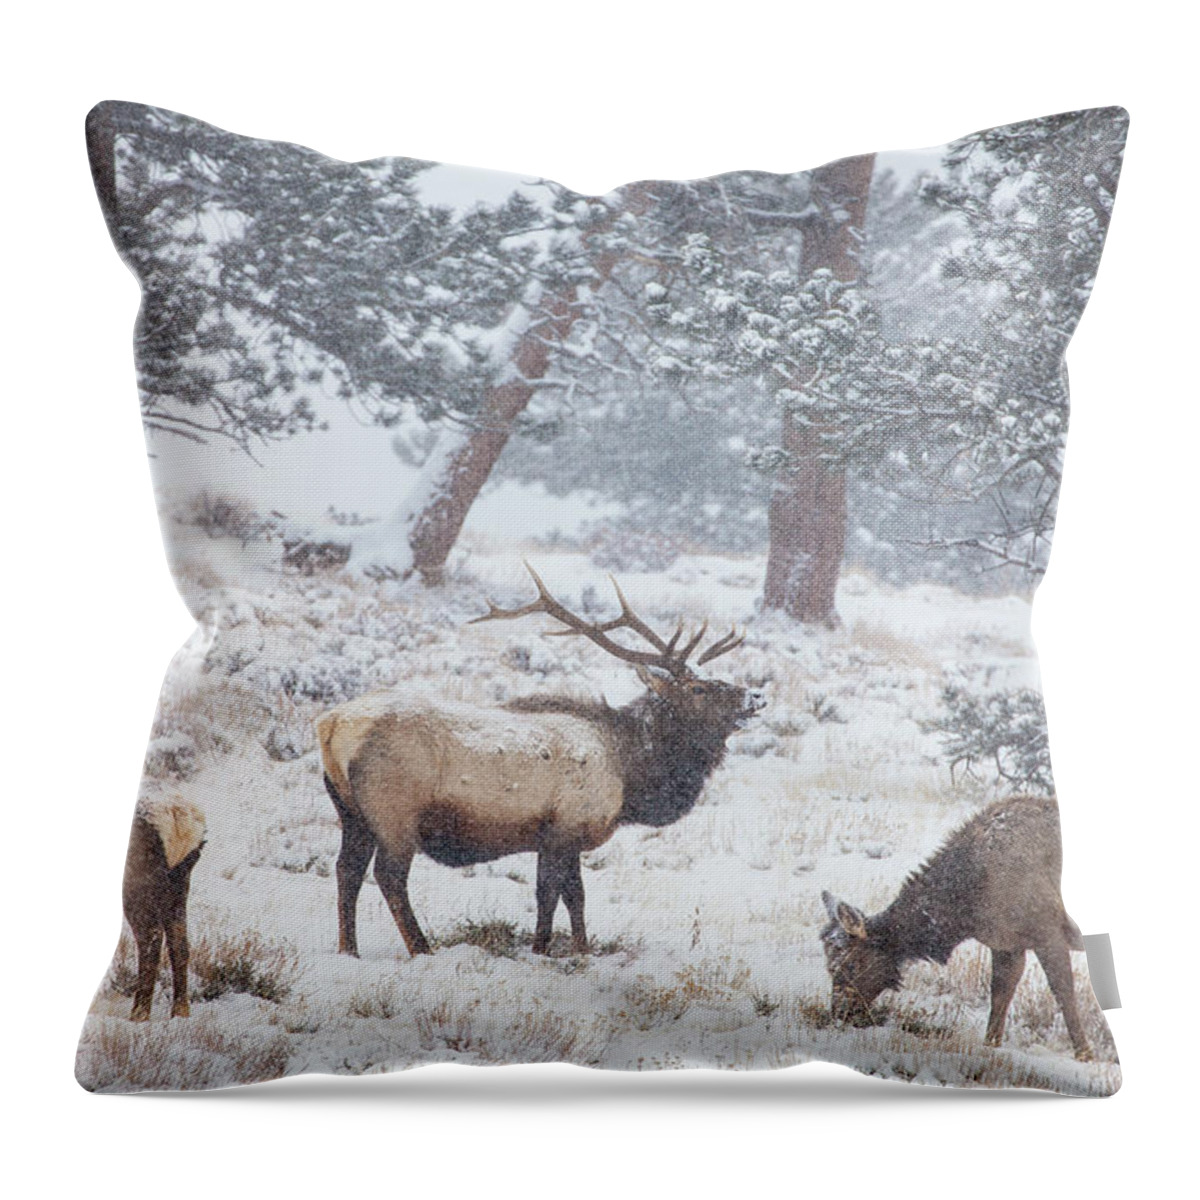 Elk Throw Pillow featuring the photograph Family Man by Darren White